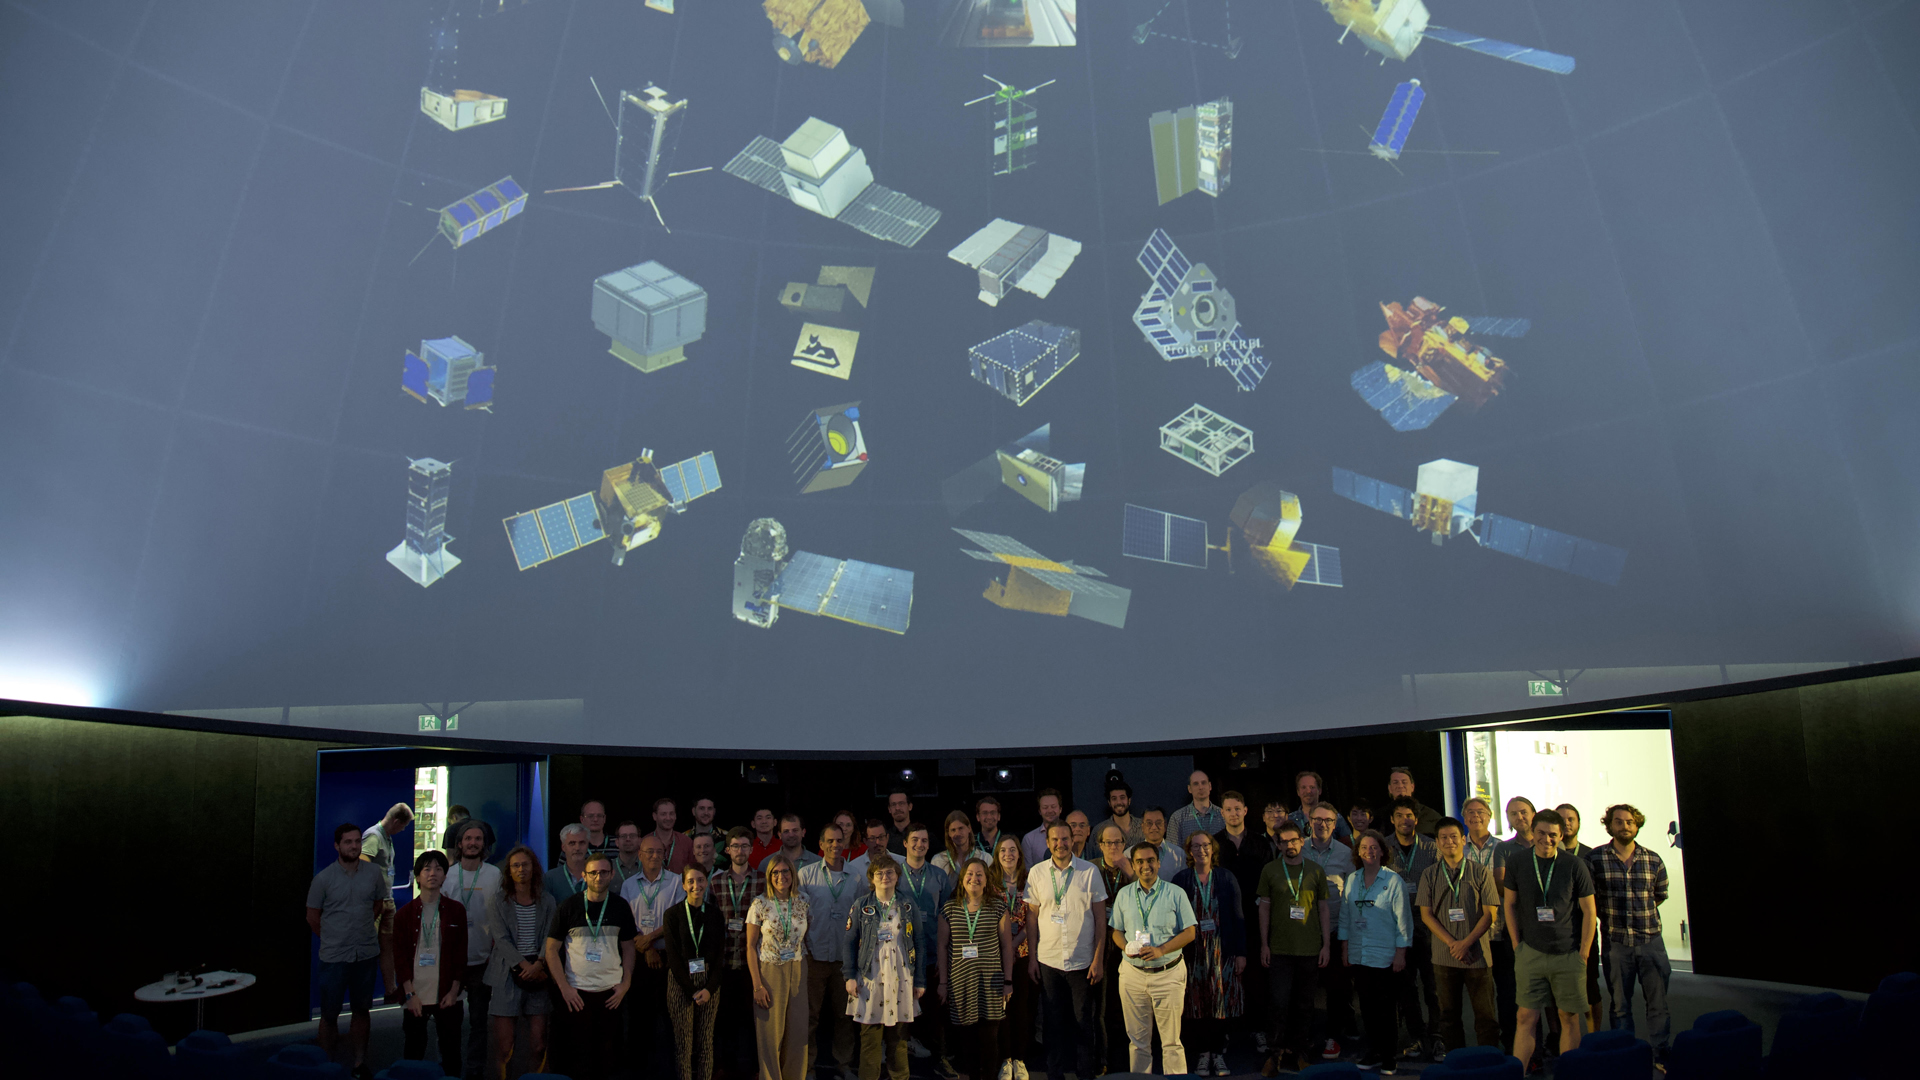 Teams from all over the world working on cubesat missions to detect gamma-ray bursts met at a conference in Brno, the Czech Republic, in 2022.